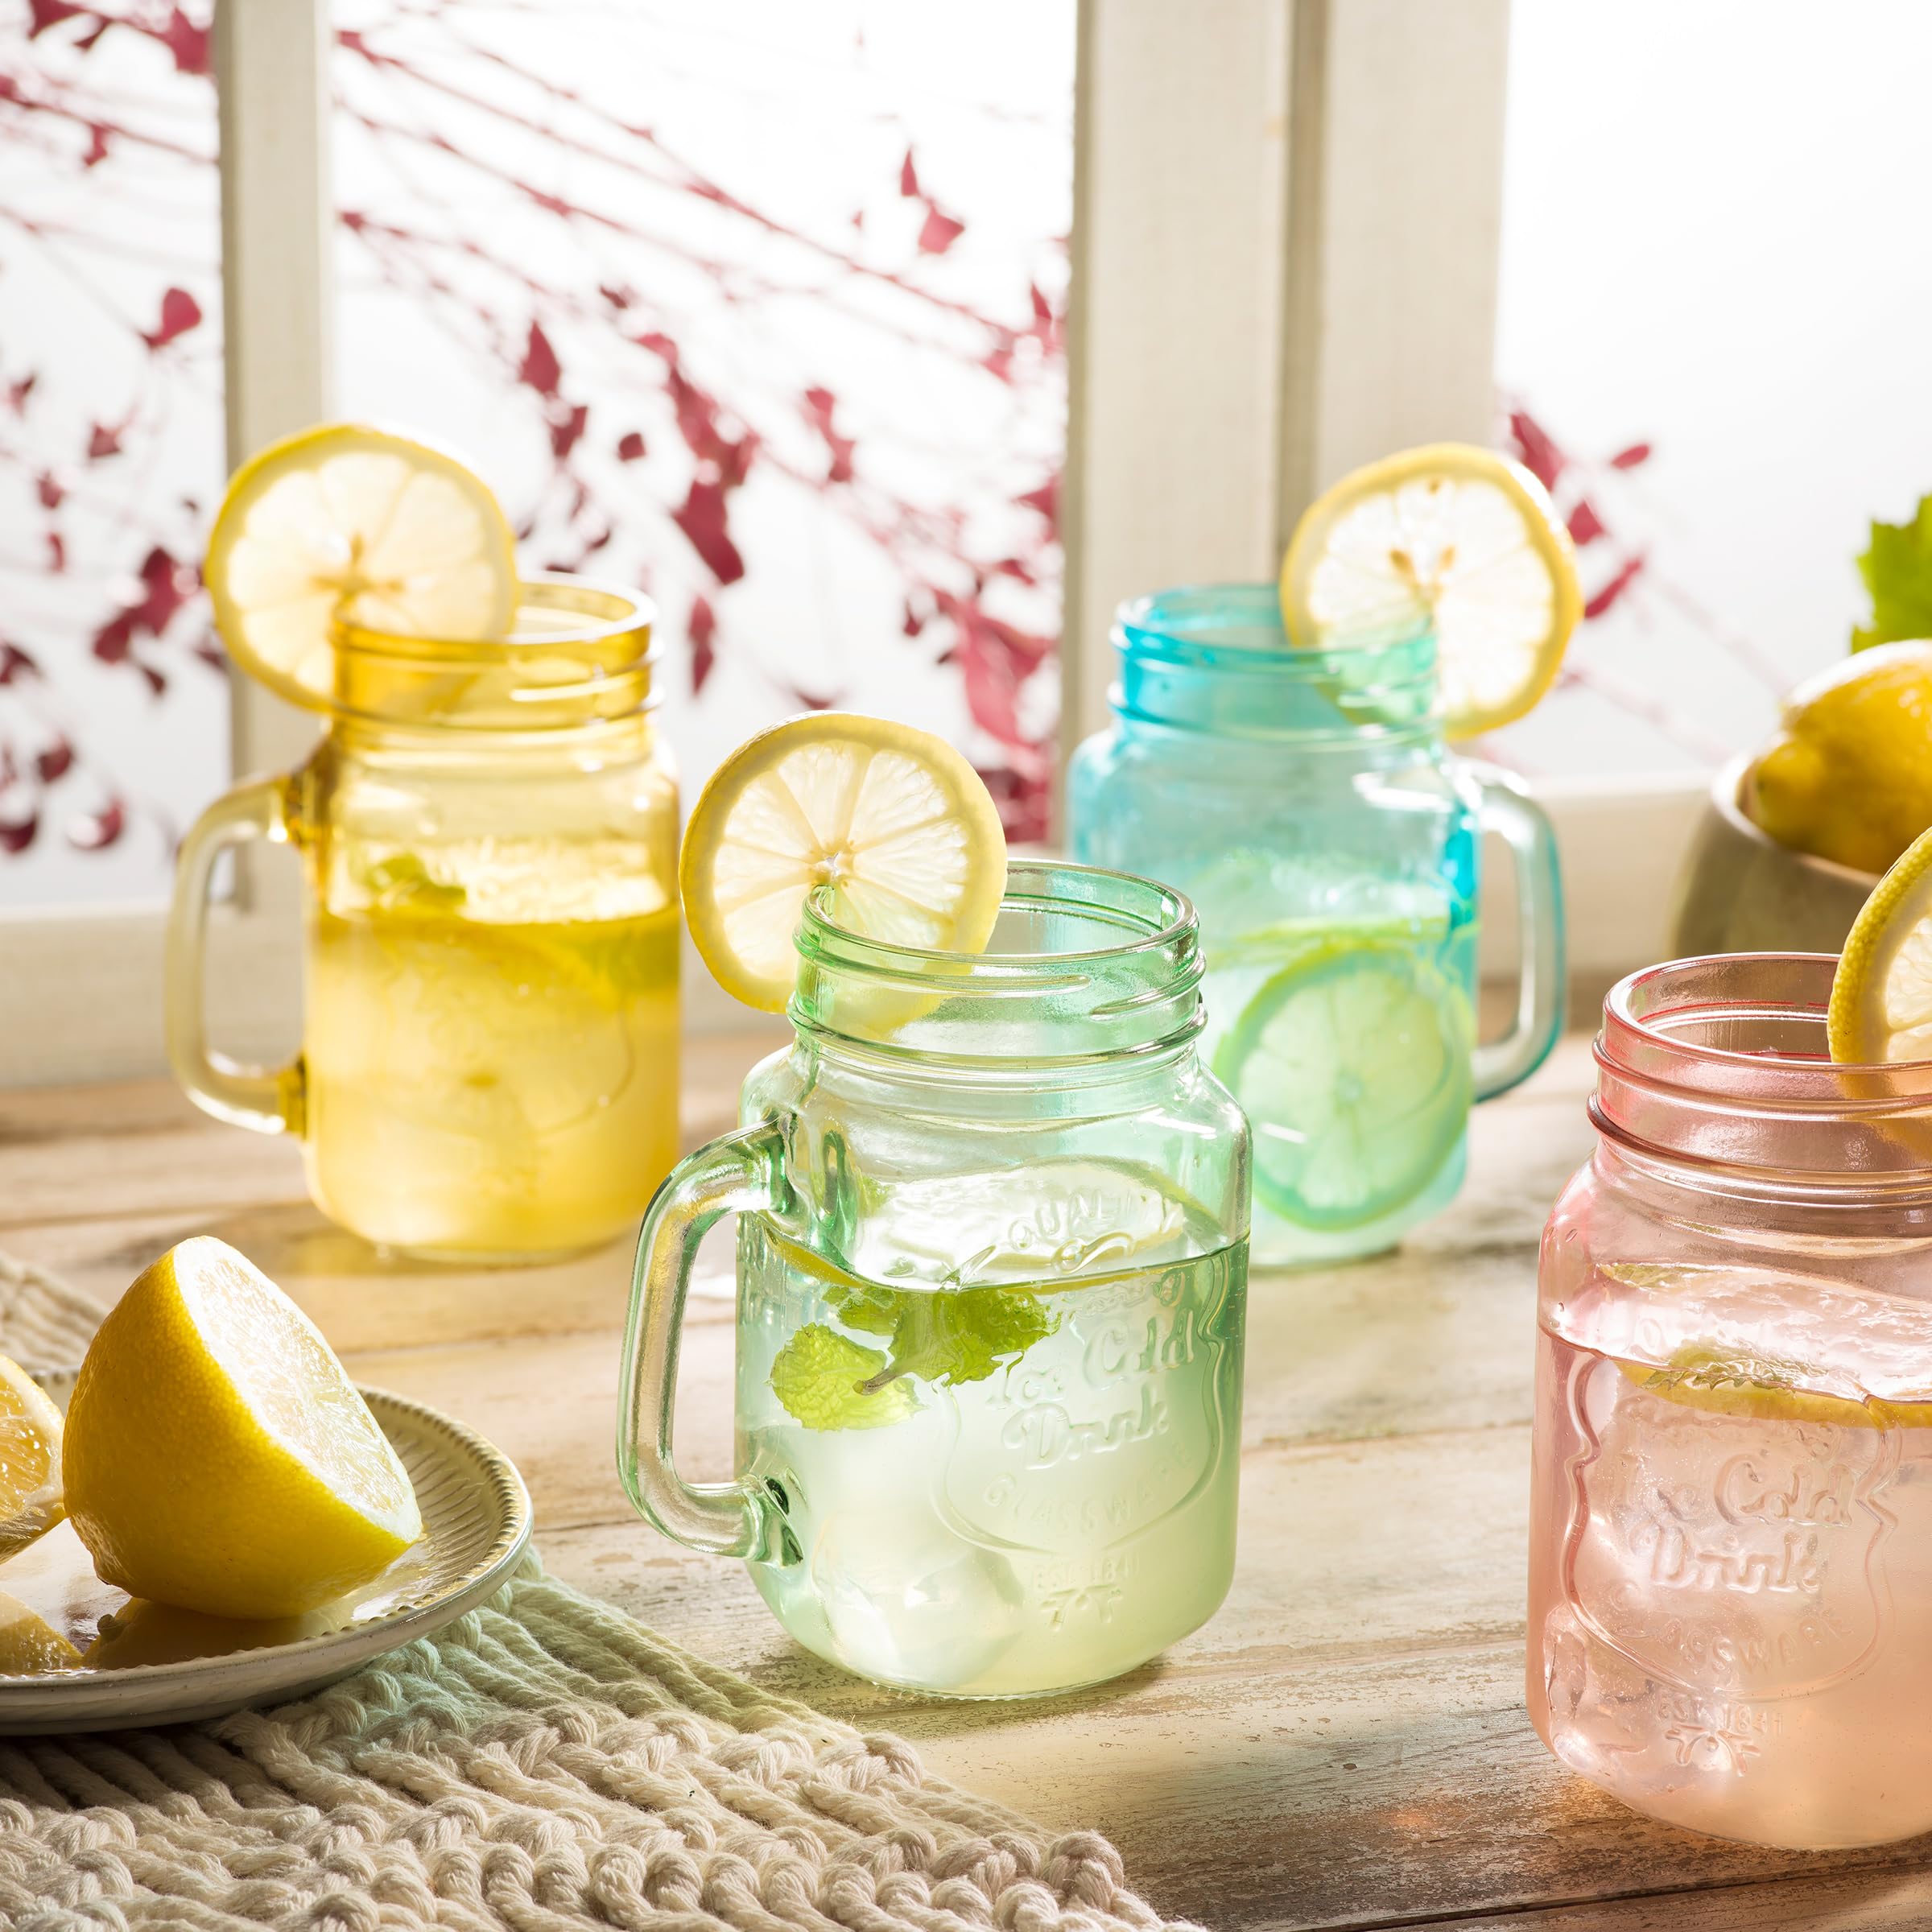 Glaver's Mason Jar Drinking Glasses Set Of 4, 15 oz. Colored Mugs With Embossed Ice-Cold Drinkware Logo, Glass Mason Jar Mug With Handle. For Smoothies, Cocktails, Beverages. Hand Wash  - Like New